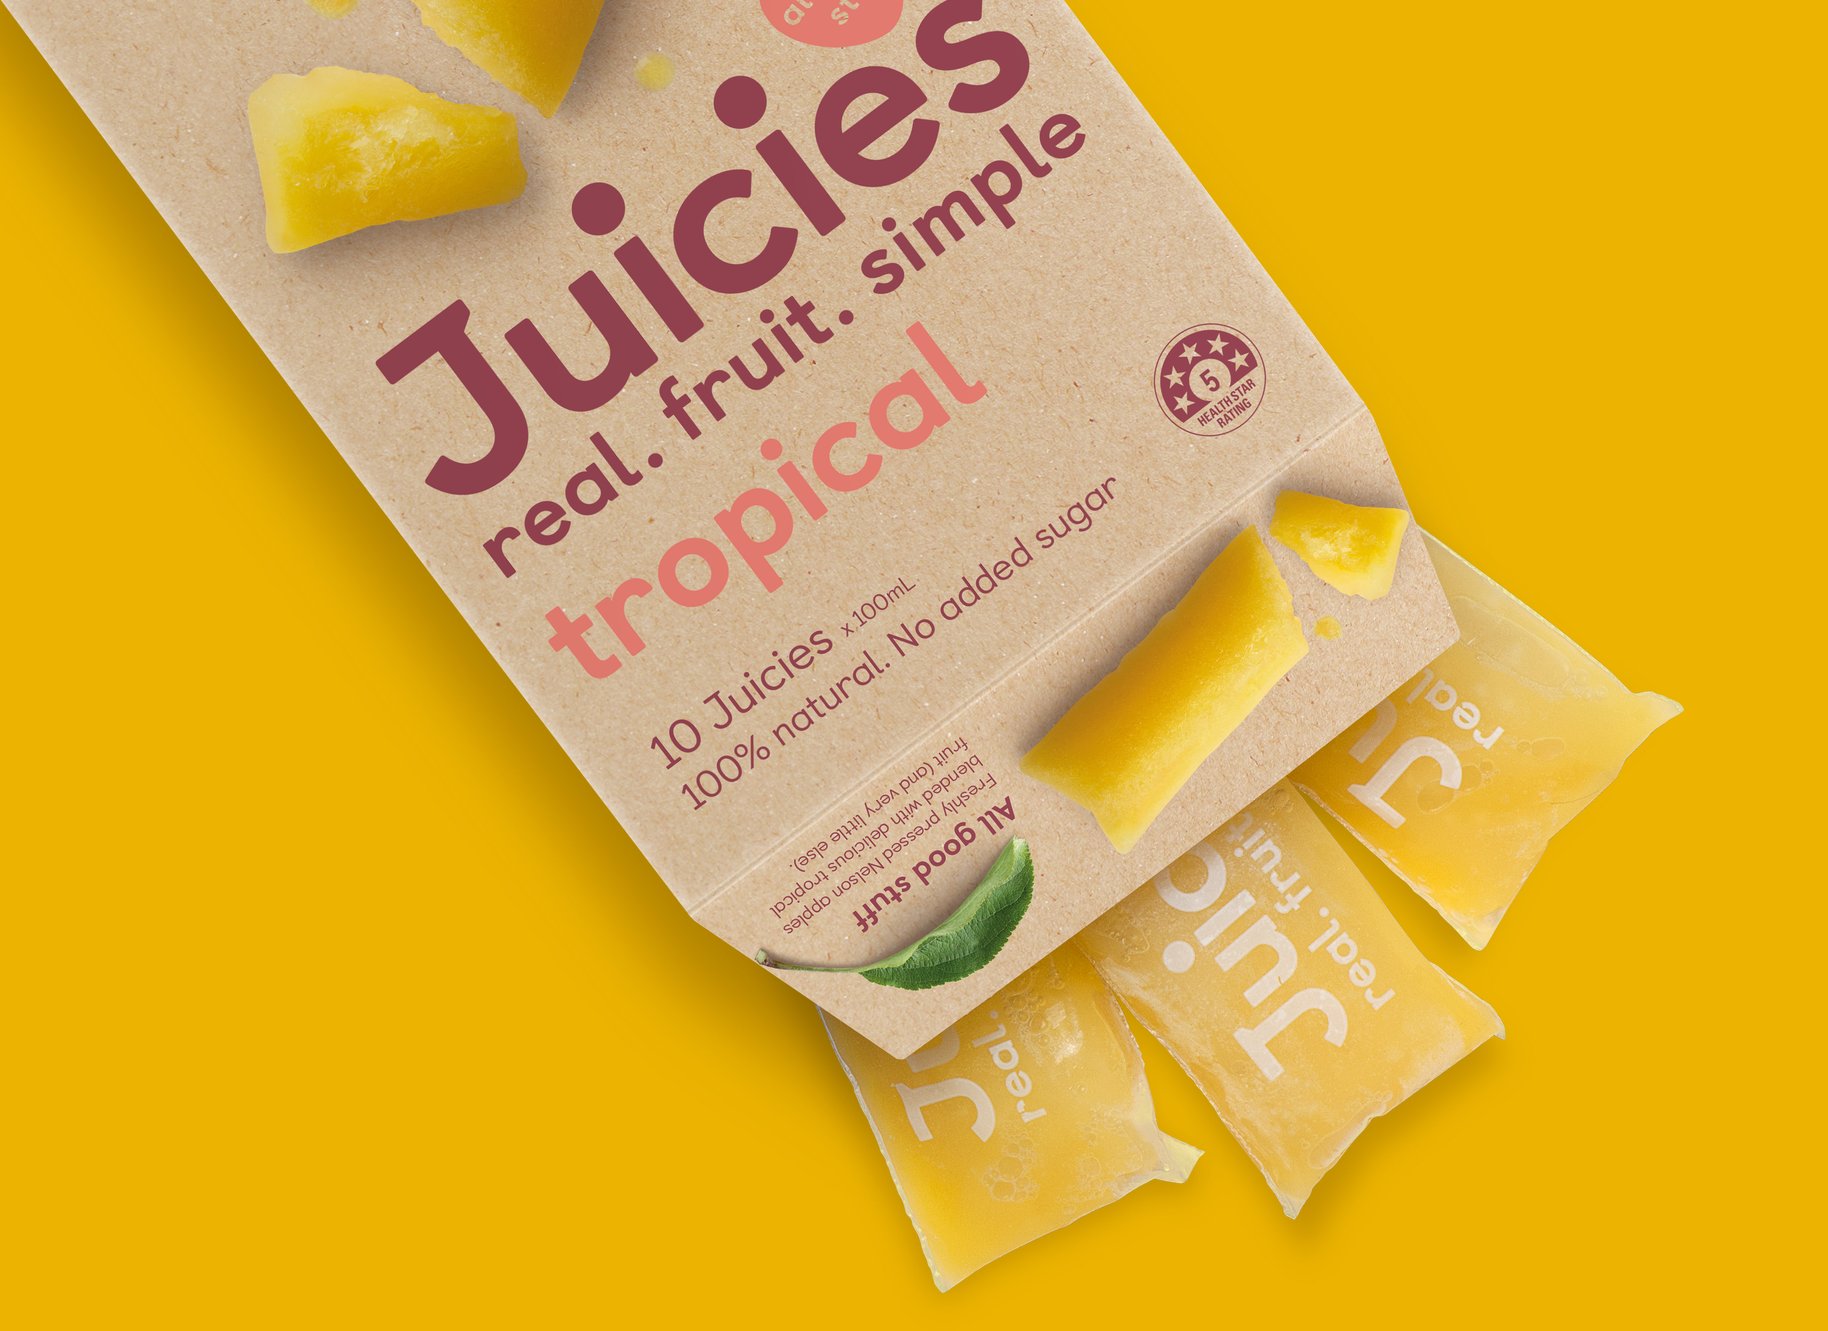 Juicies Box with Juicies coming out